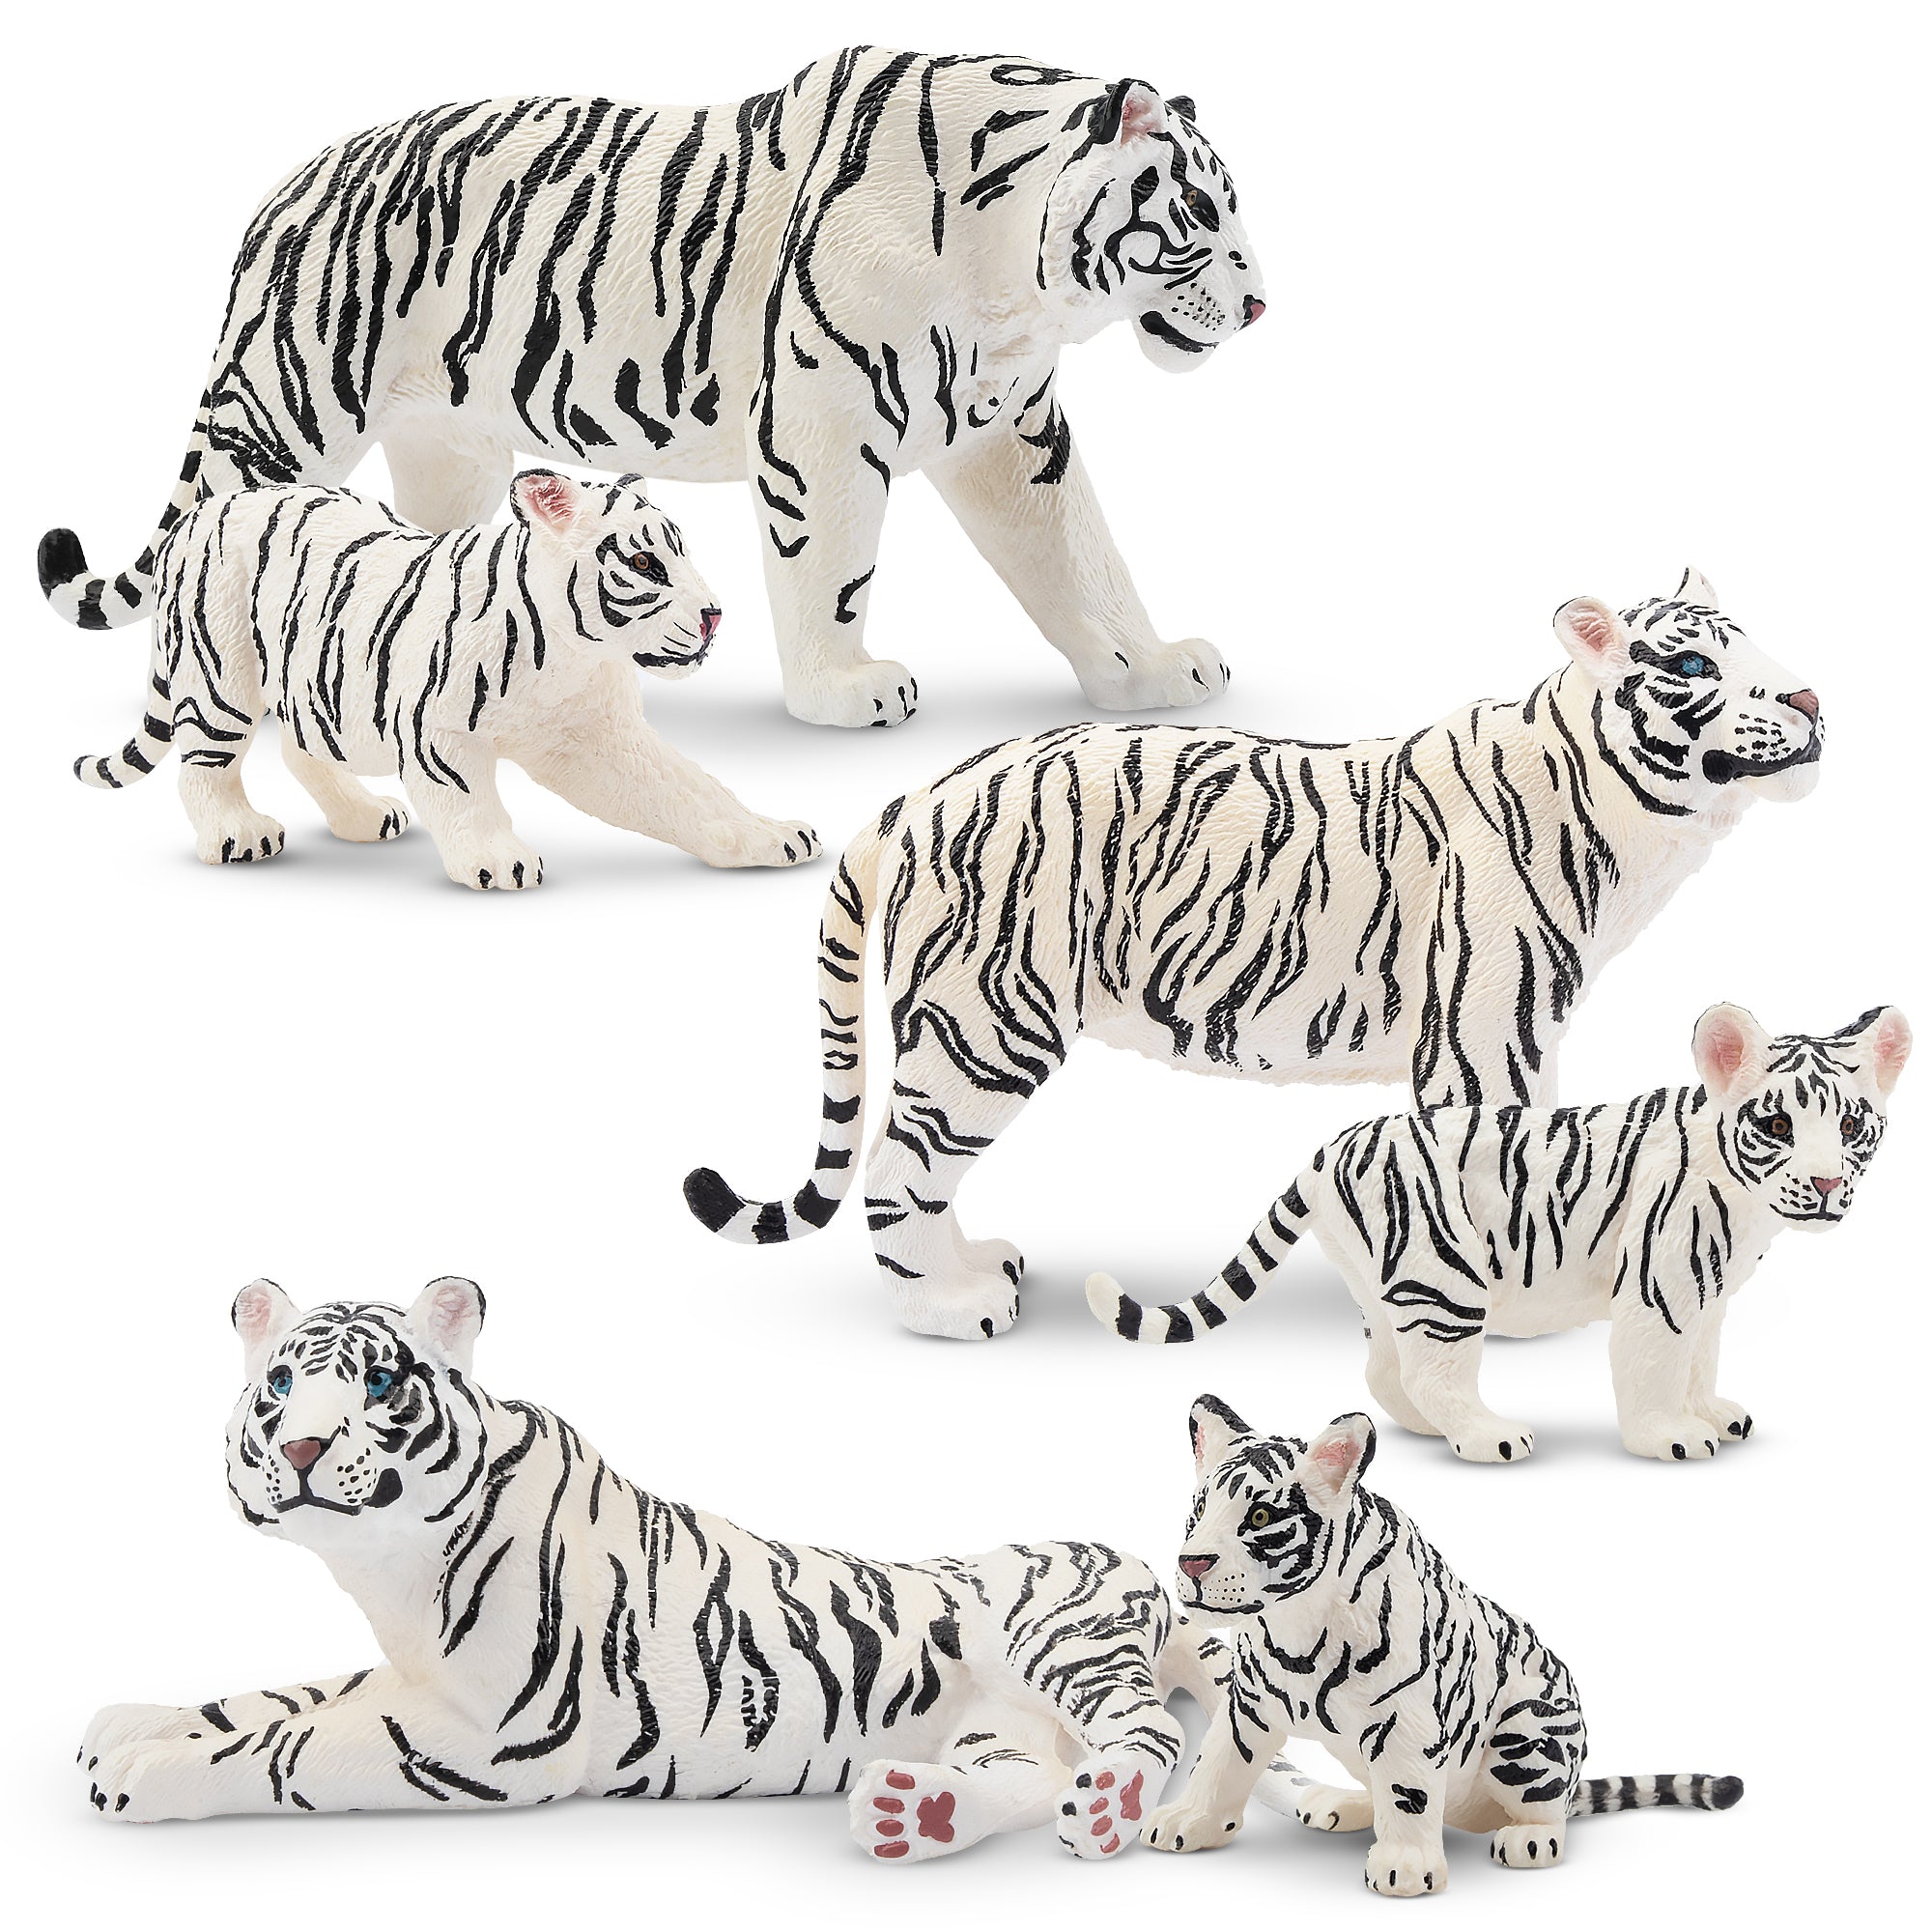 6-Piece White Tigers Family Figurines Playset-2